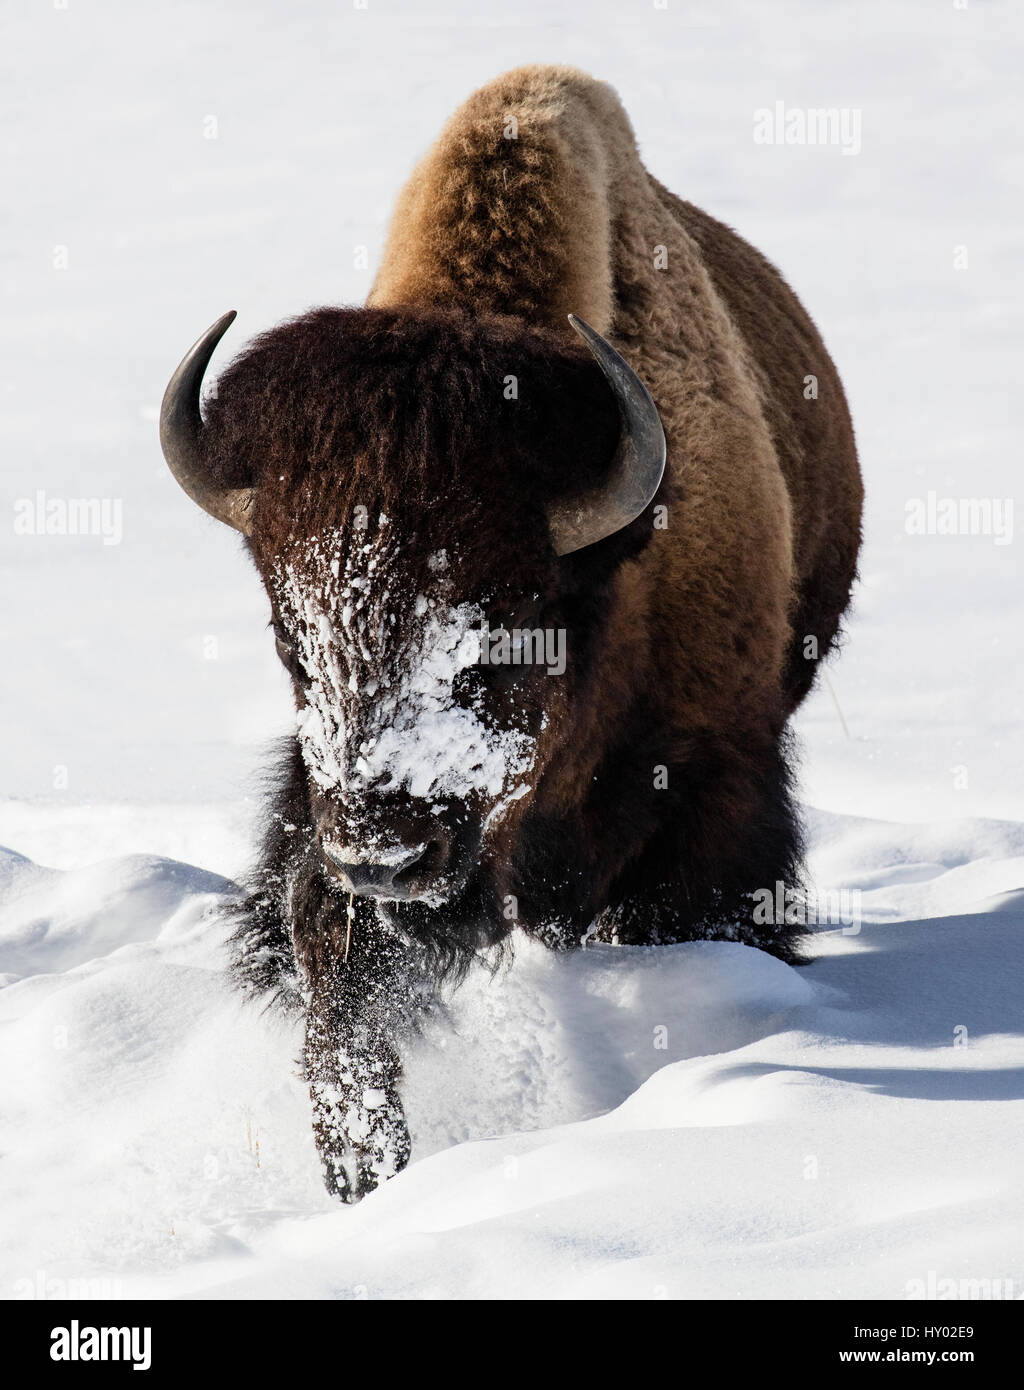 Bison (Bison bison) walking in winter snow, Yellowstone, USA. January. Stock Photo